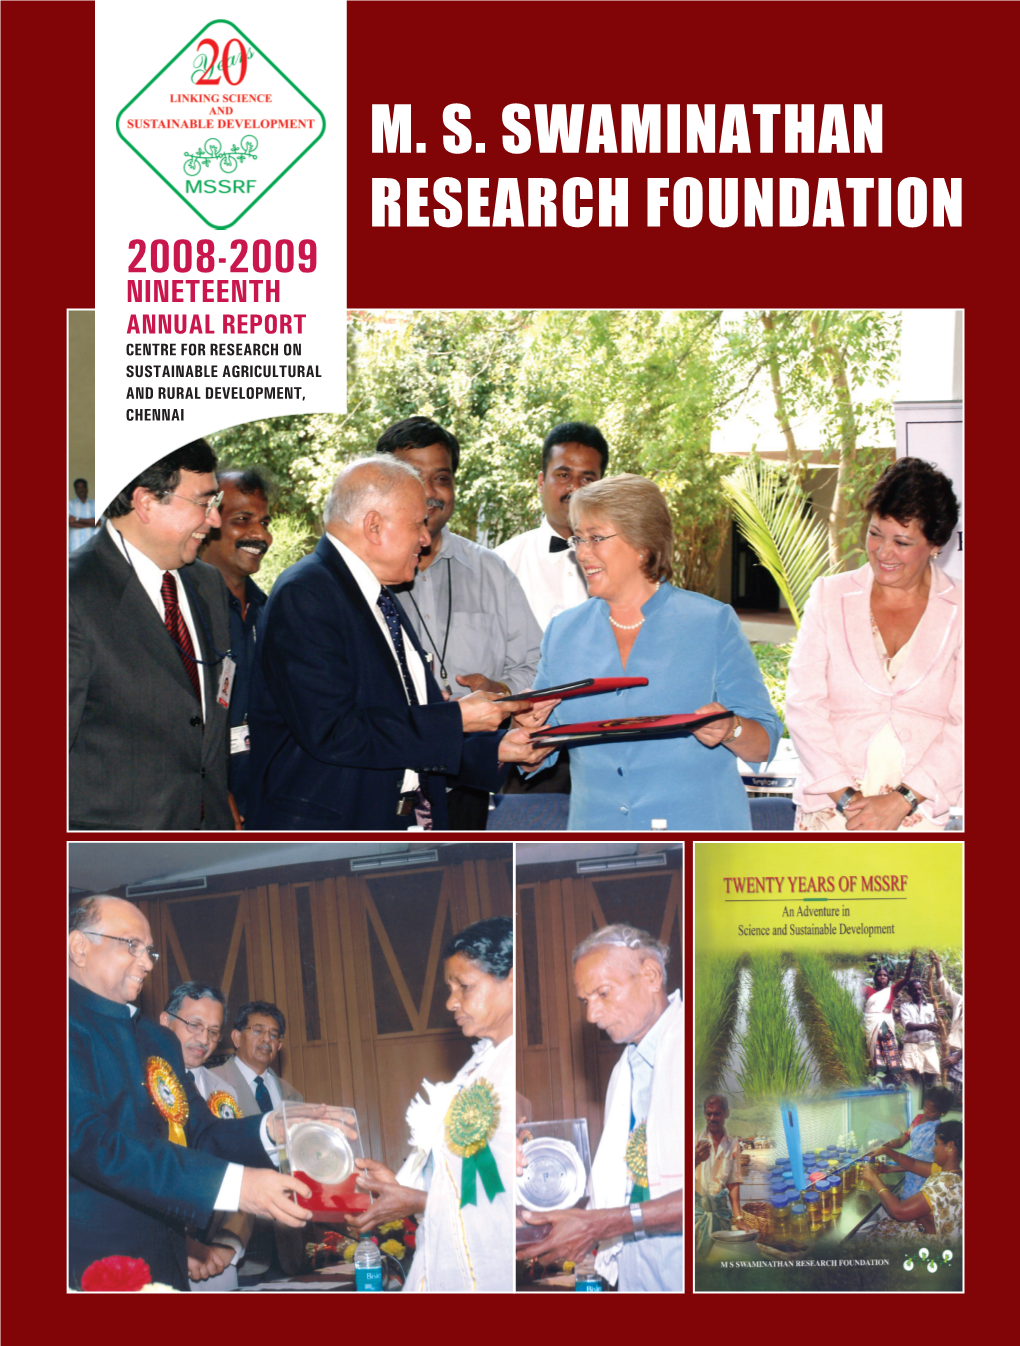 Nineteenth Annual Report Centre for Research on Sustainable Agricultural and Rural Development, Chennai